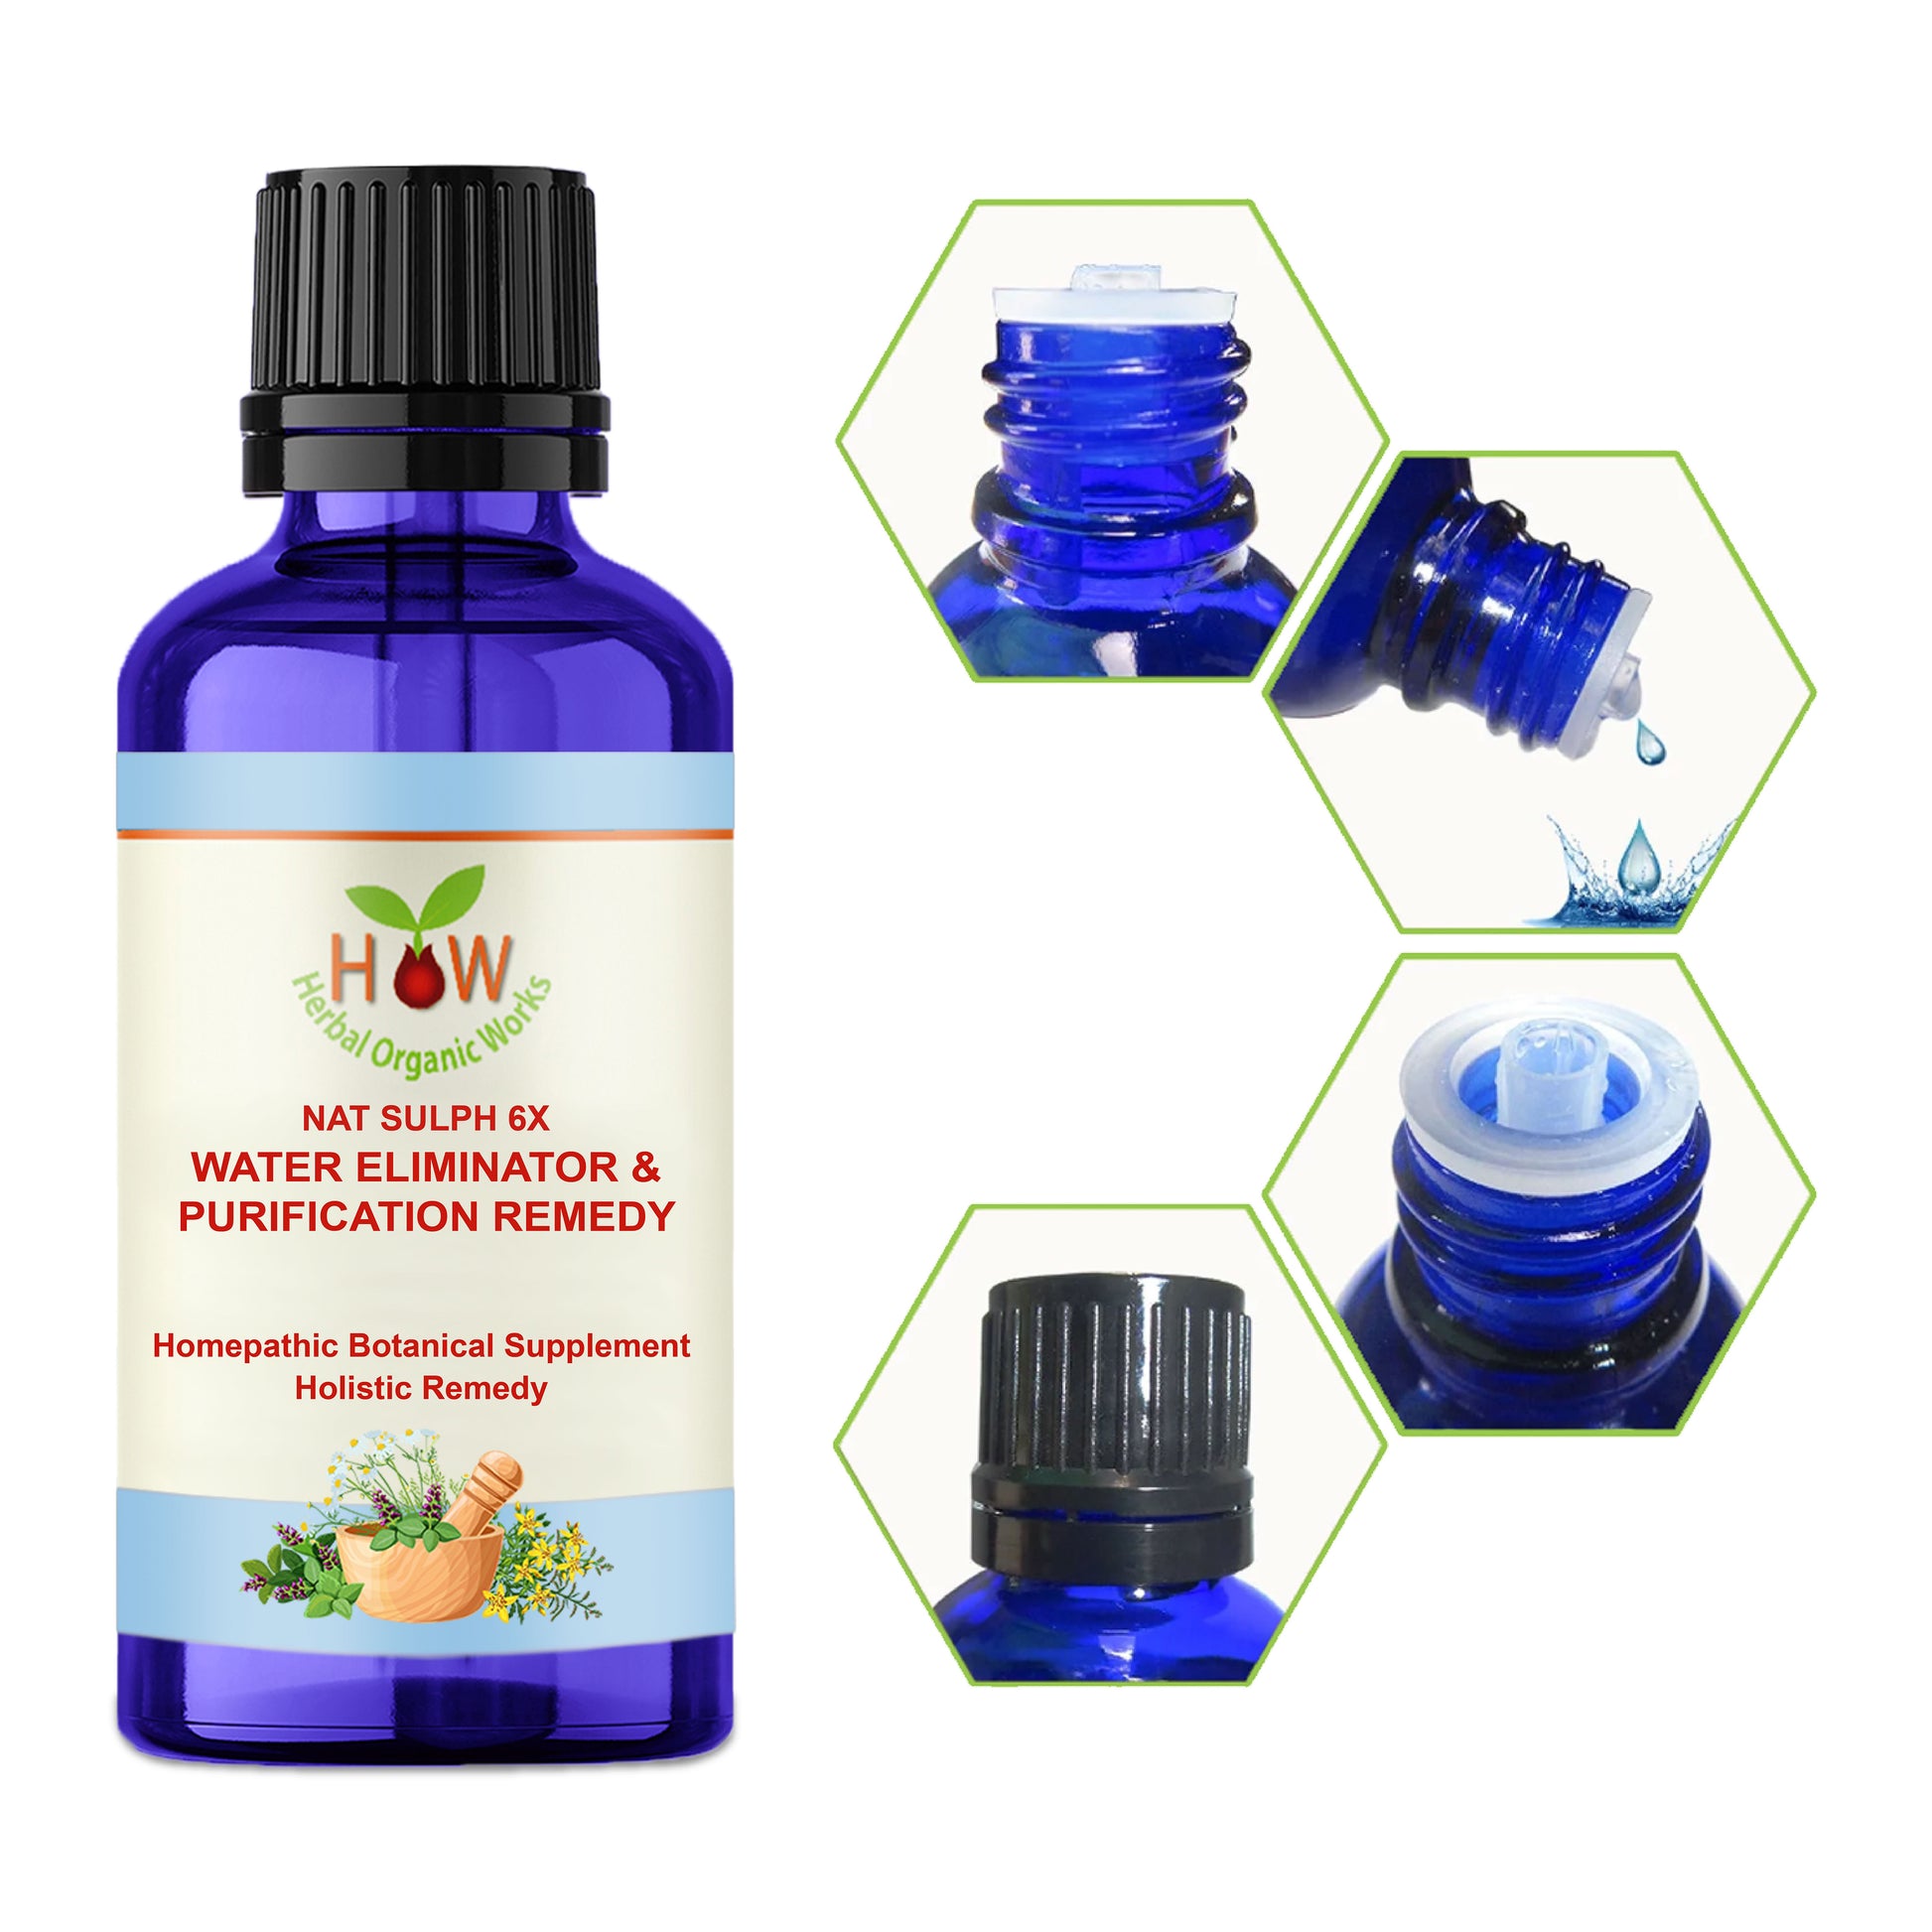 WATER ELIMINATOR AND PURIFICATION REMEDY